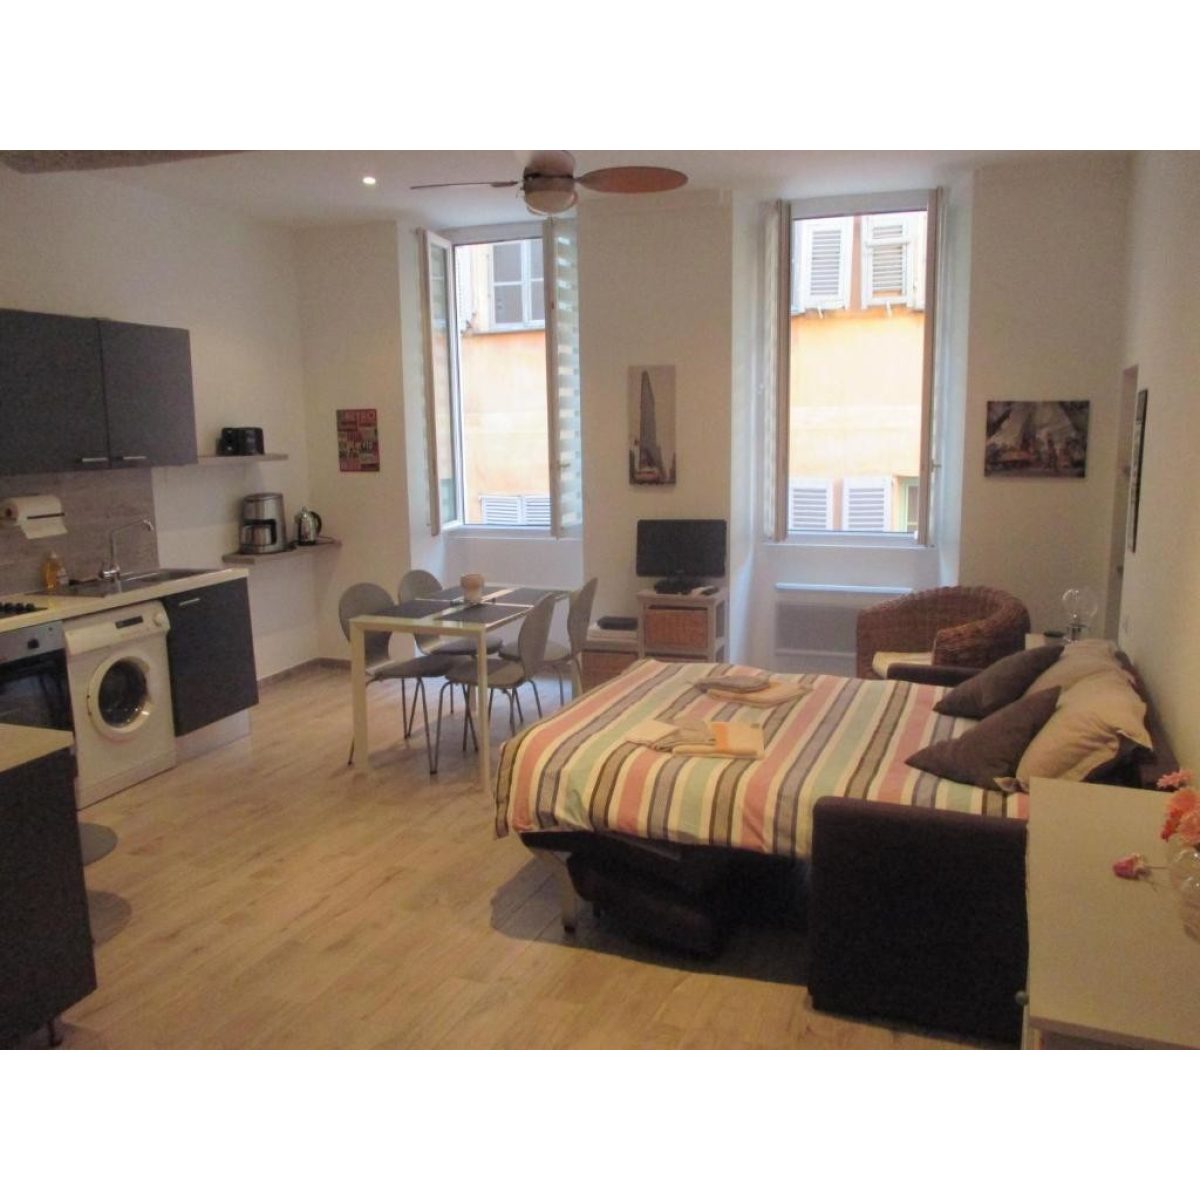 Dazzling 2 bedroom apartment in Zagreb for rent (Students only) | Zagreb apartment for rent 15